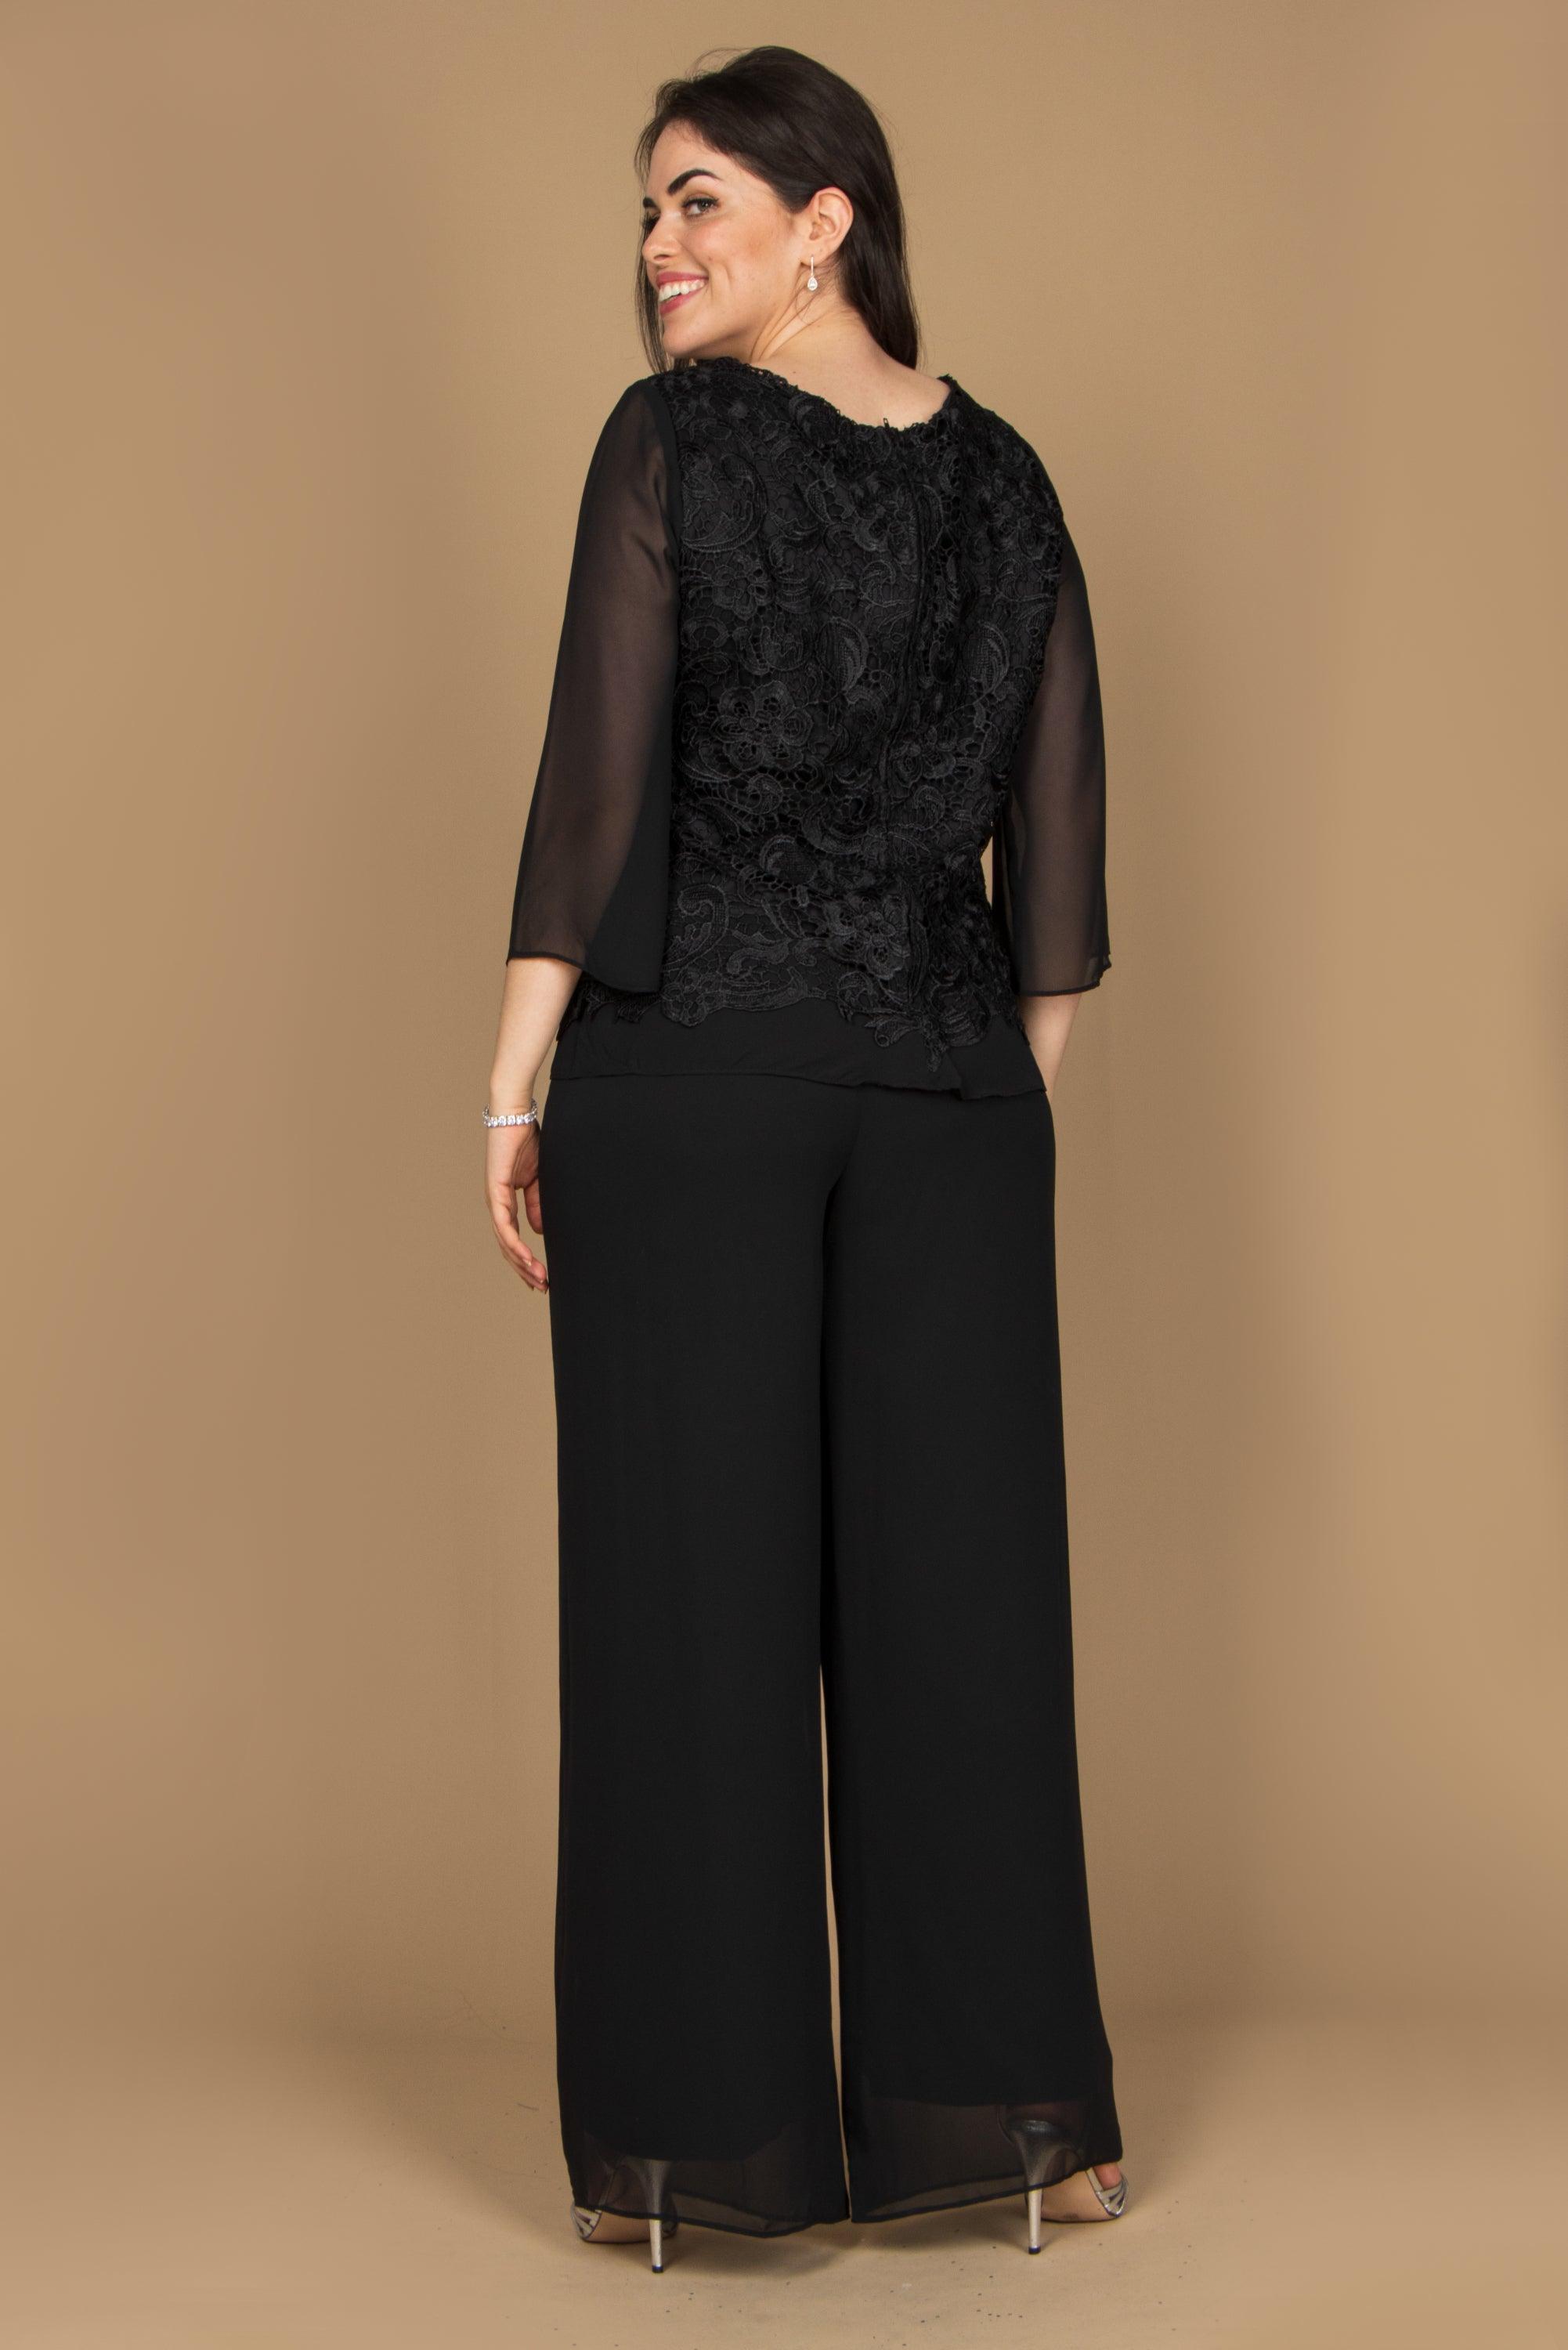 Formal Mother of the Bride Lace Pant Suit - The Dress Outlet